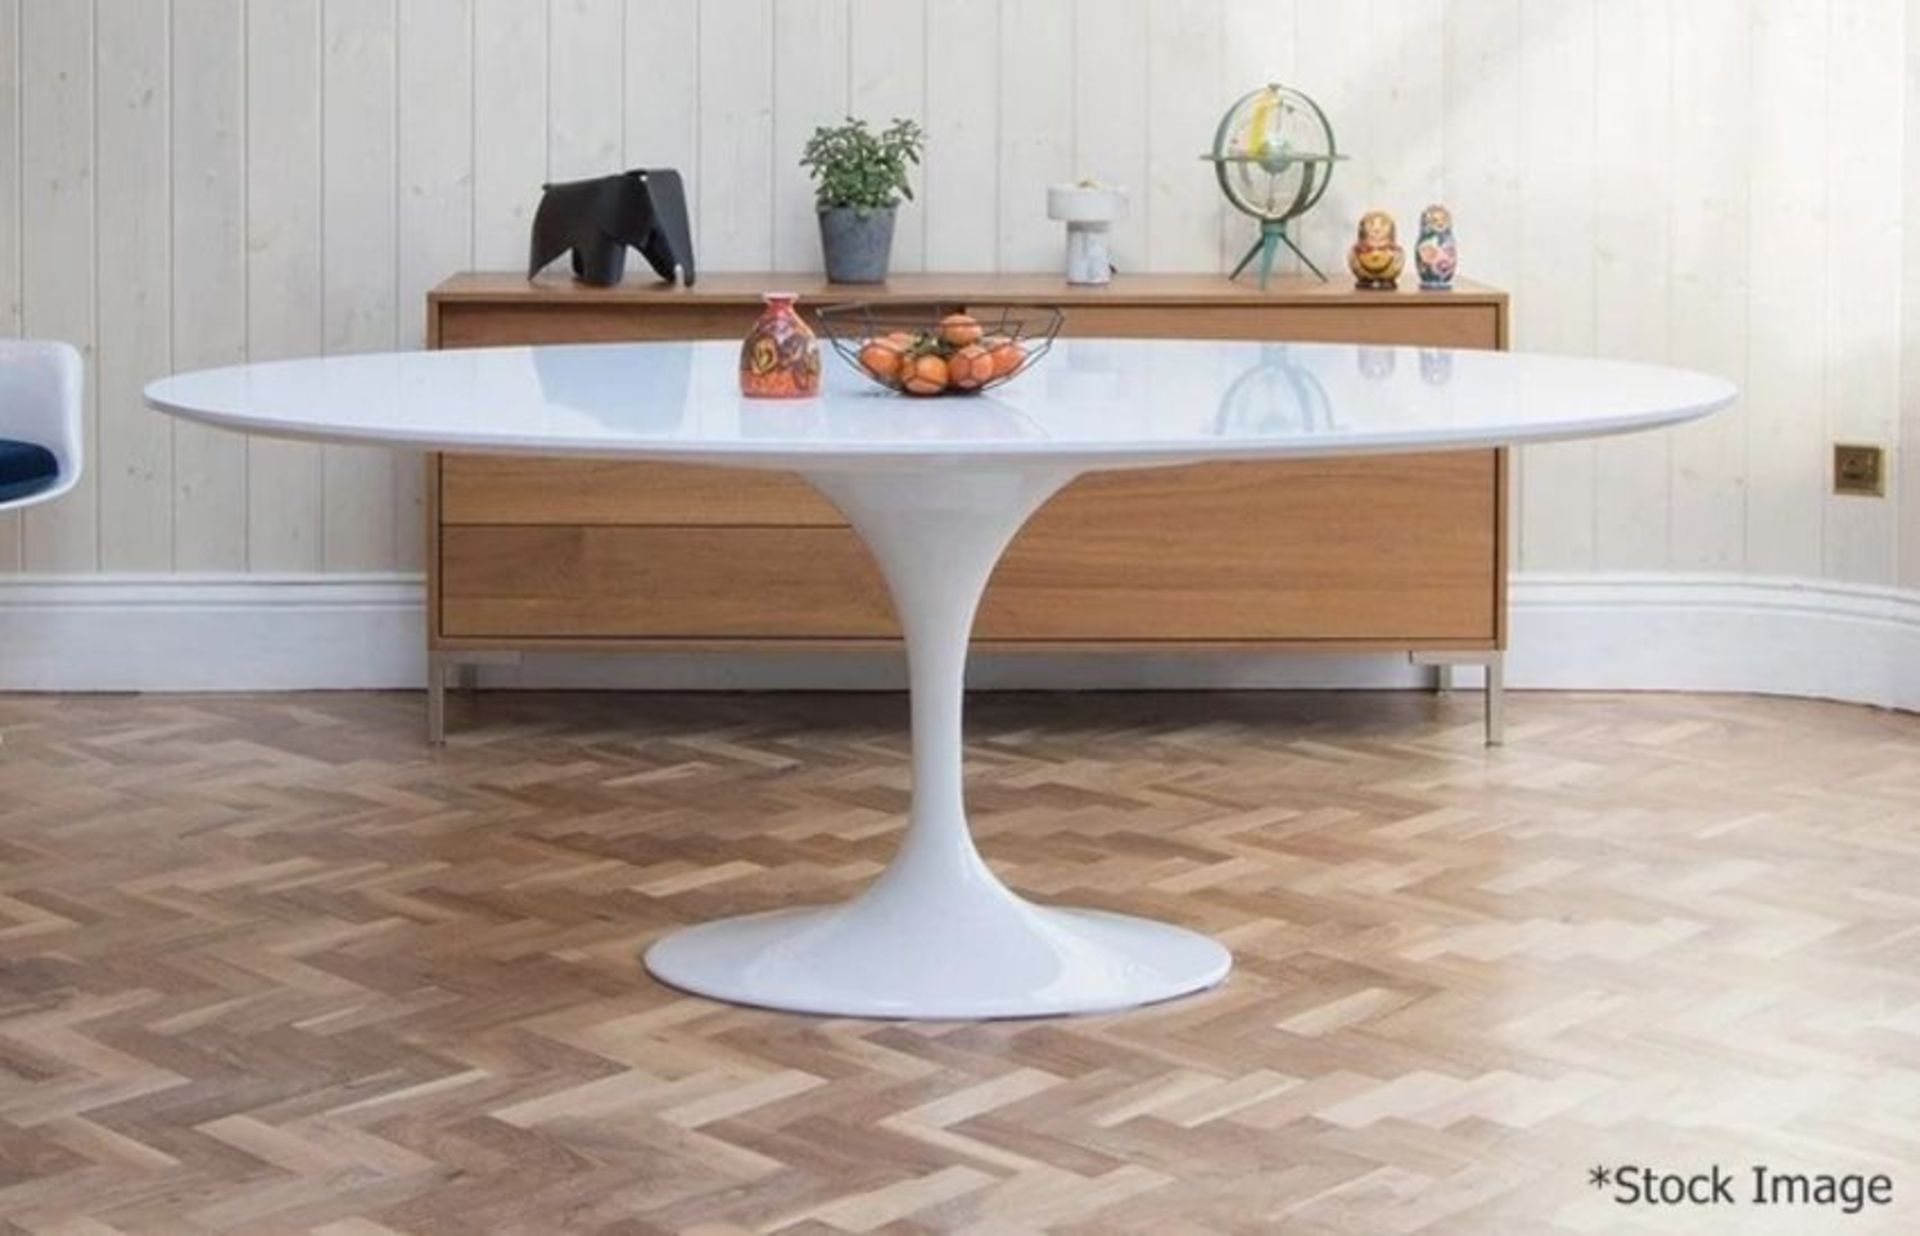 EERO SAARINEN STYLE INSPIRED LARGE OVAL DINING TABLE IN WHITE - RRP £549